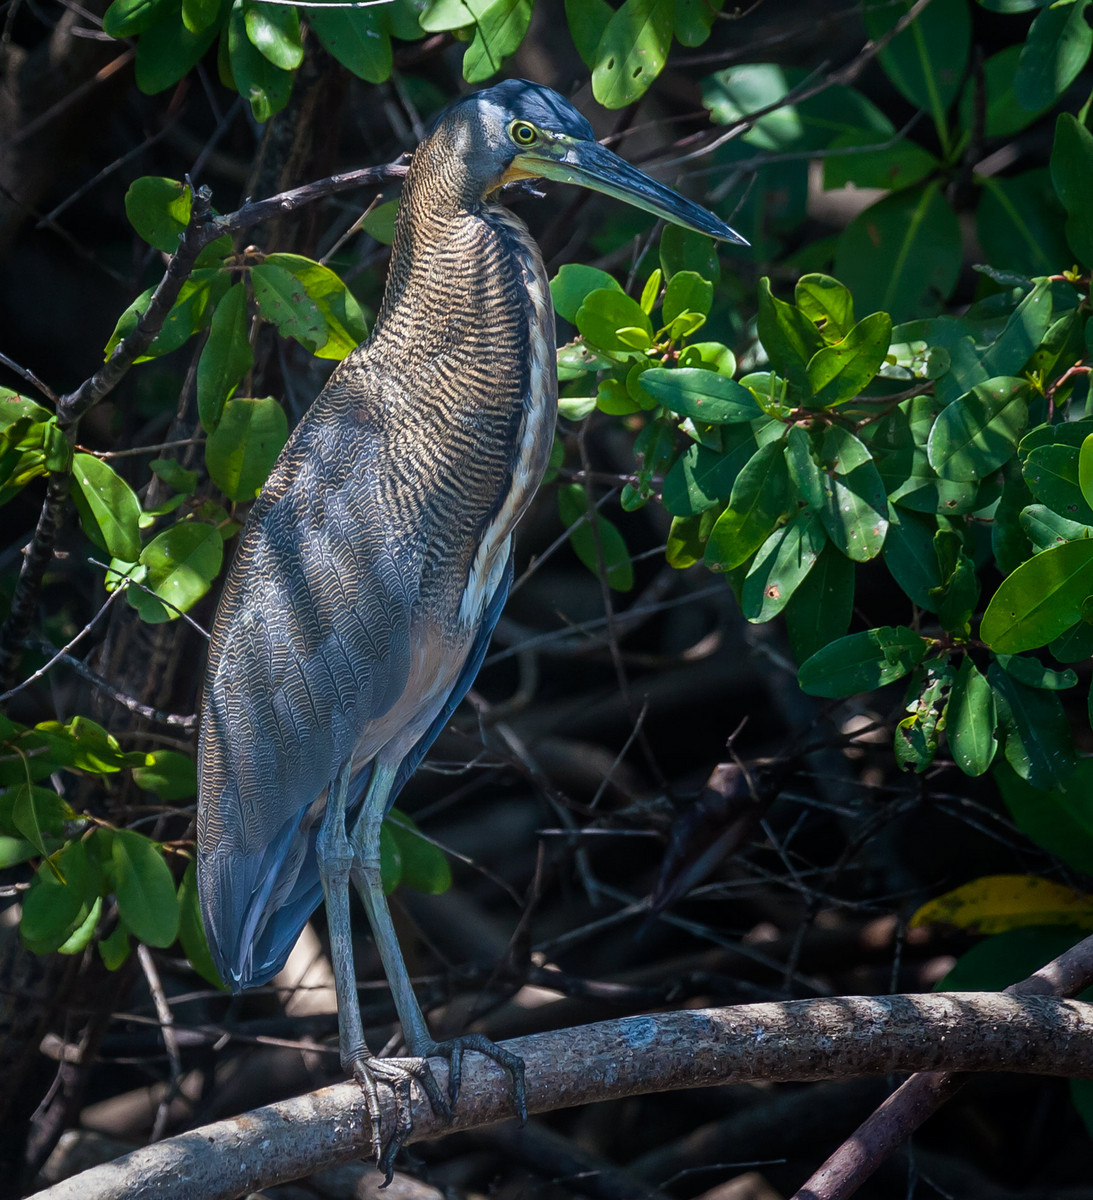 One of the important avian aquatic predators in the Sittee River ecosystem: the Bare-throated Tiger Heron